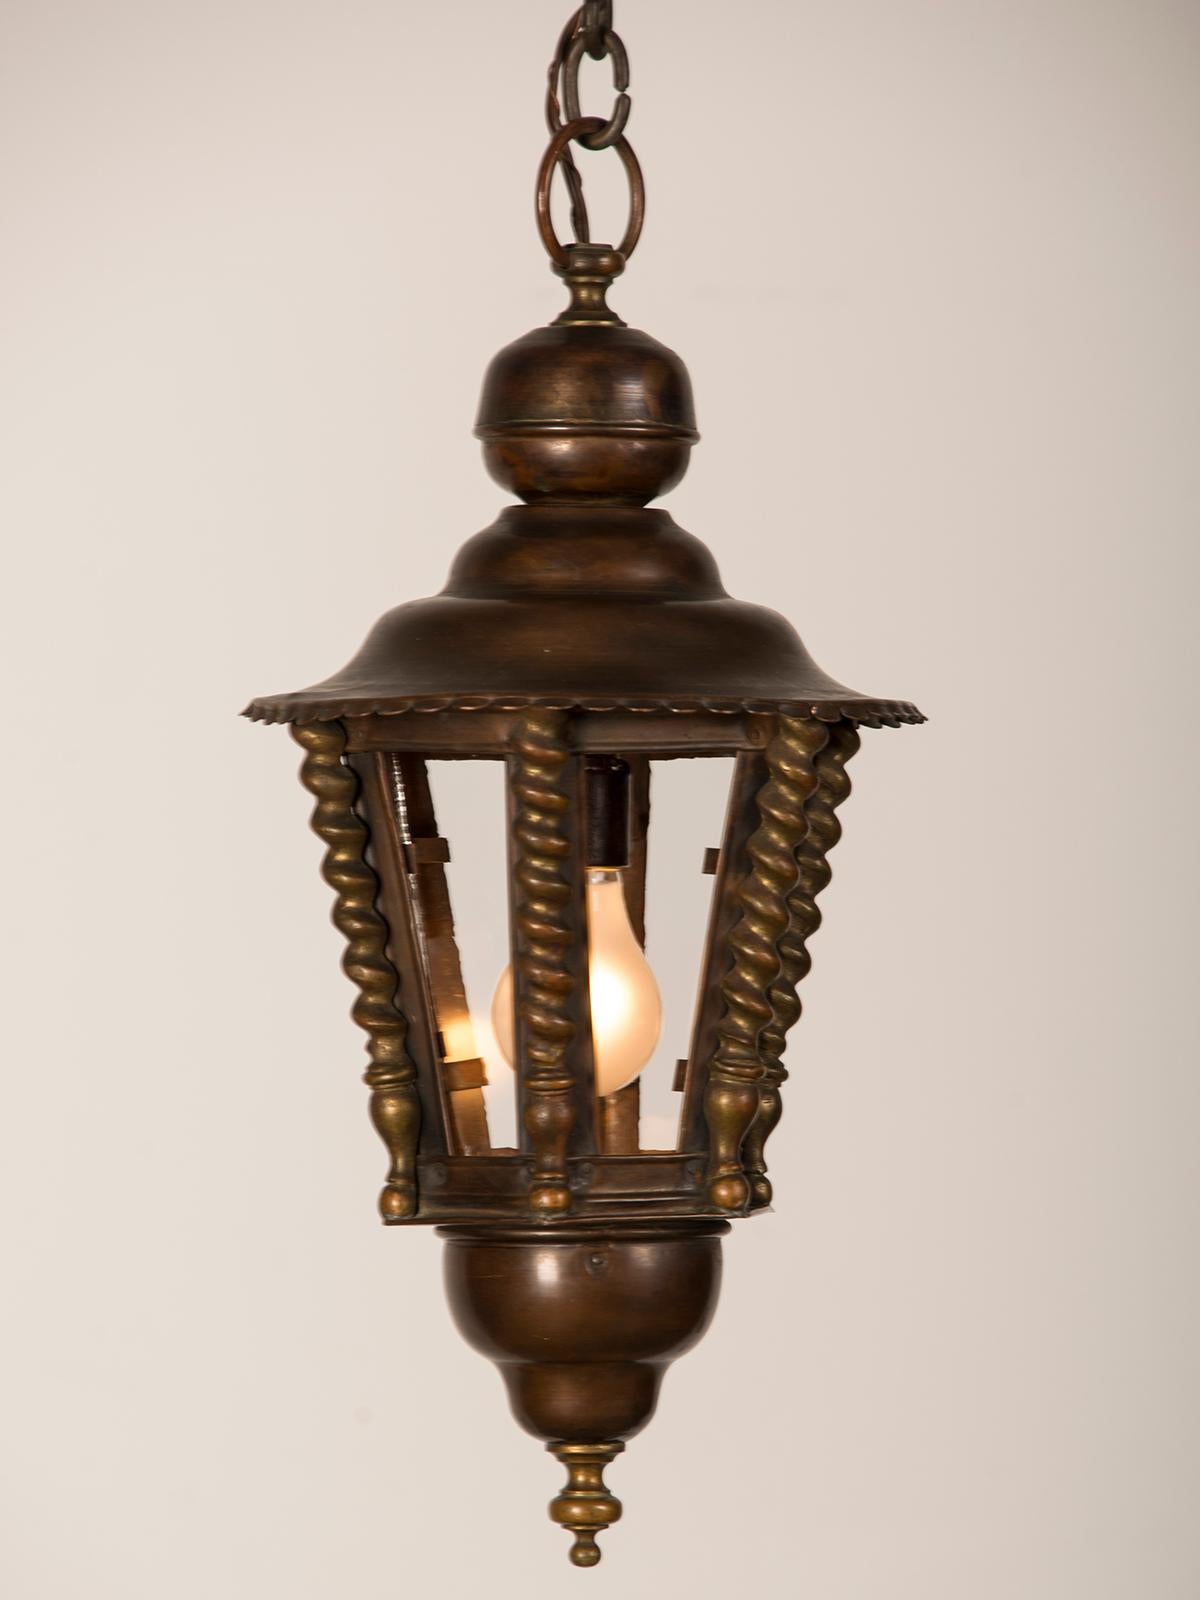 A handsome vintage French brass and copper hall lantern from France circa 1920 with a hexagon shape. The six panes of clear antique glass enable a maximum amount of light to be cast by this lantern and the socket will accommodate a standard base